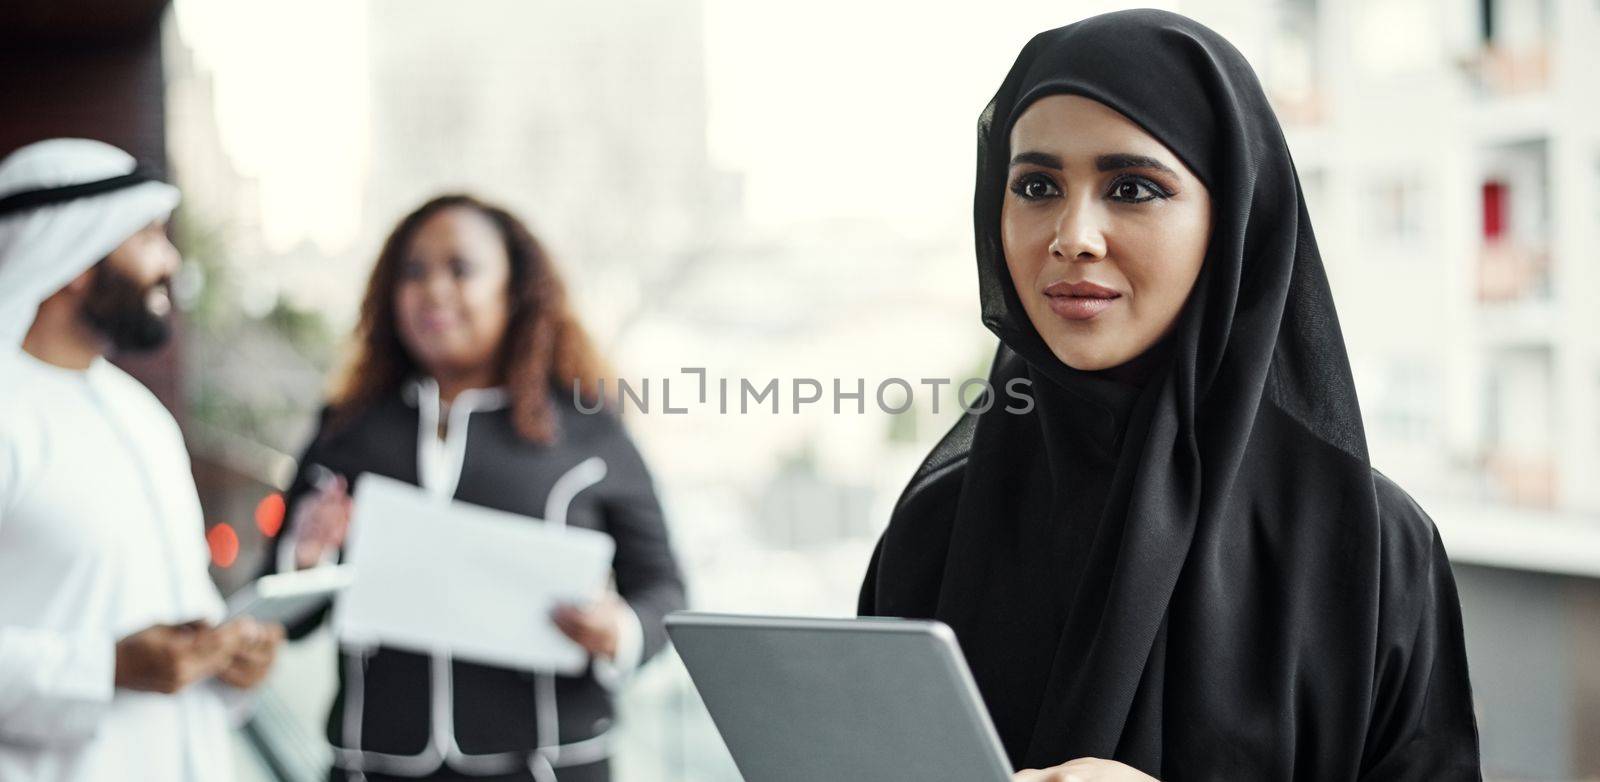 Taking her work mobile. an attractive young businesswoman dressed in Islamic traditional clothing using a tablet on her office balcony